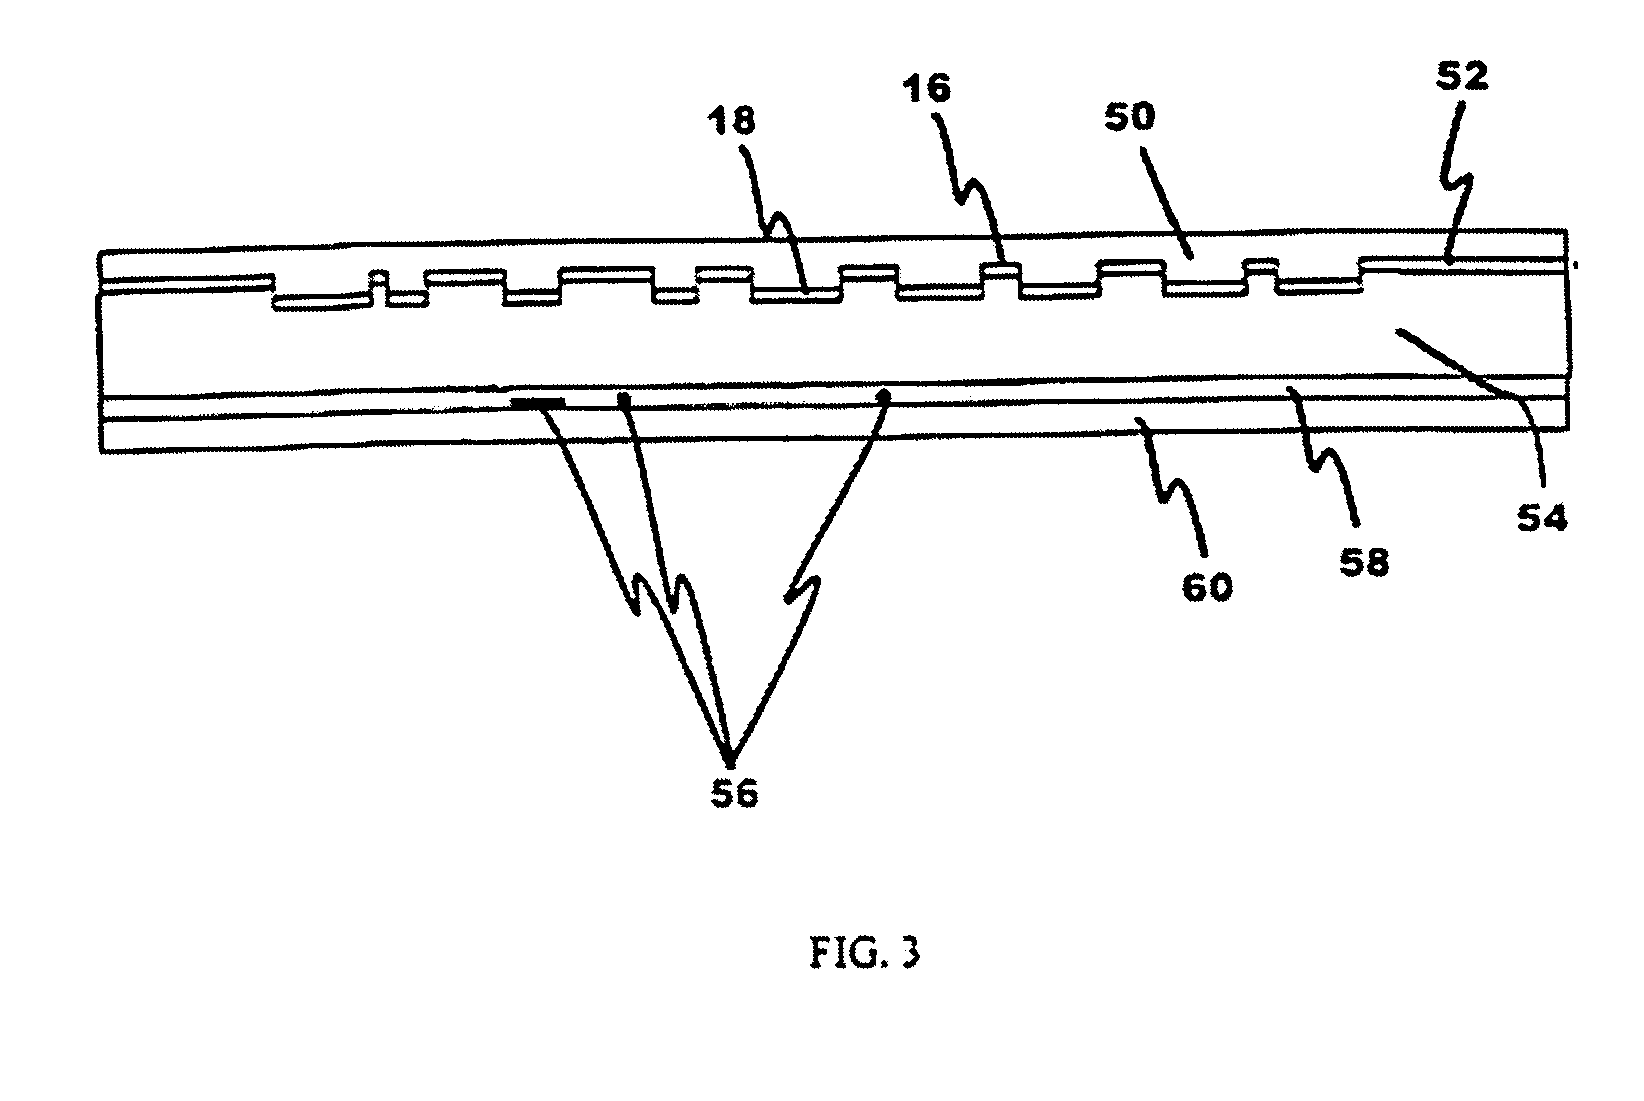 Copy-protected optical media and method of manufacture thereof